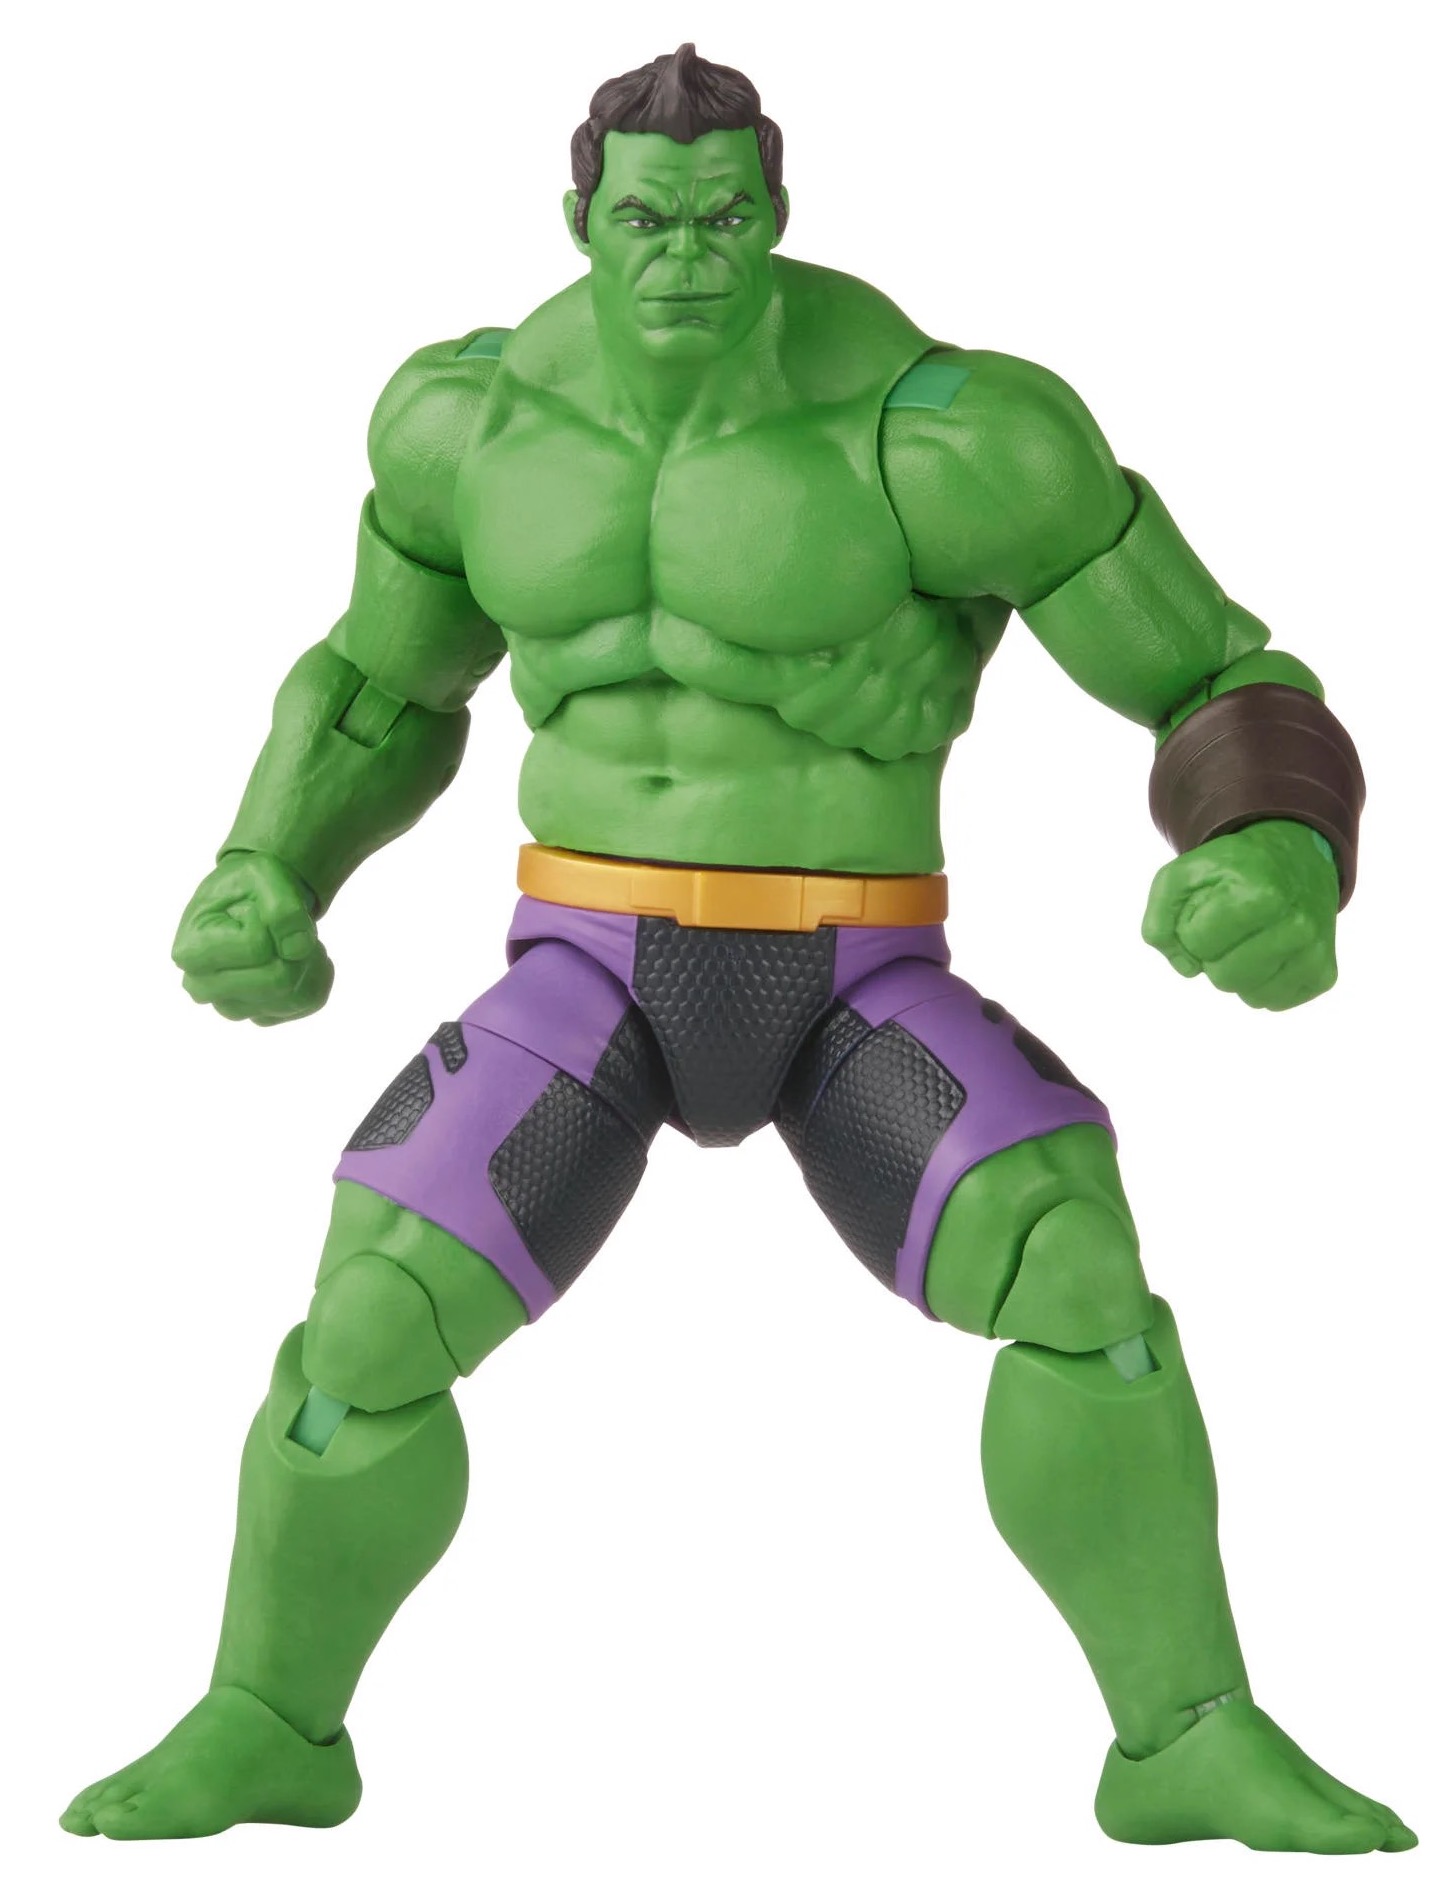 Marvel Legends Totally Awesome Hulk Totally Awesome Hulk Build A Figure